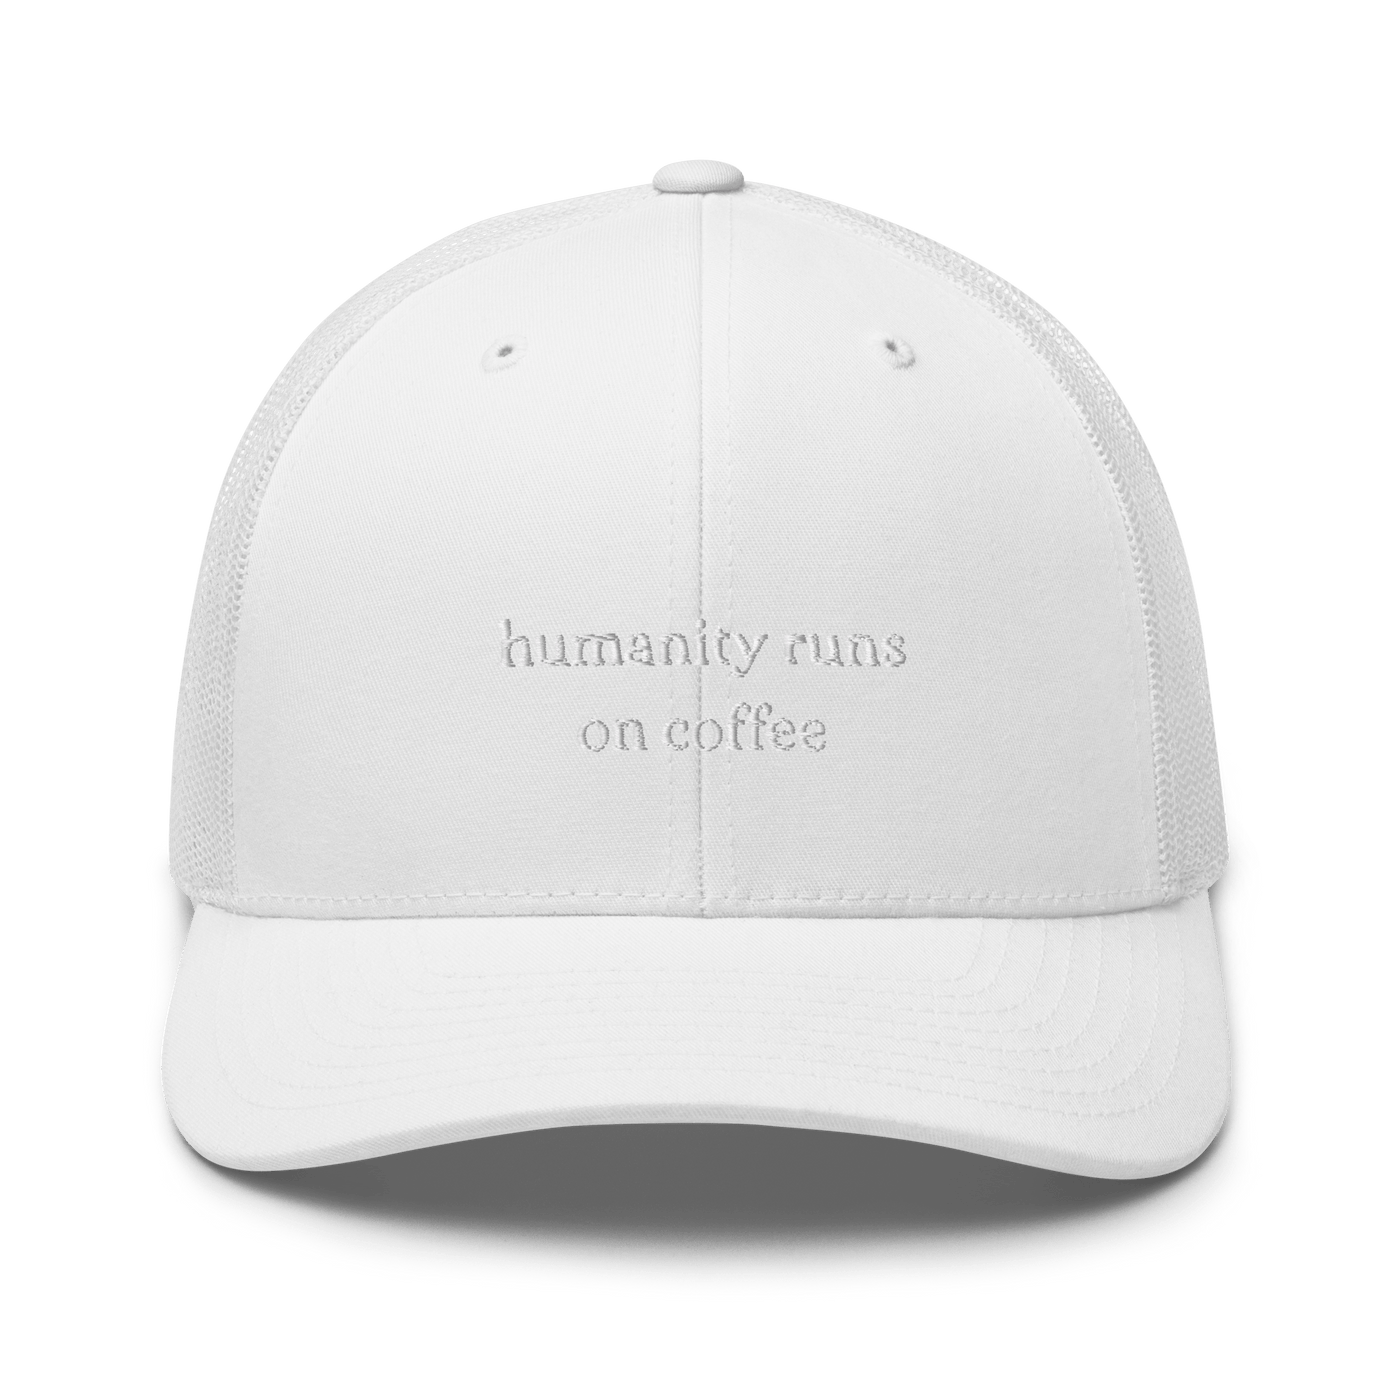 Humanity Runs on Coffee Trucker Cap - White - - Just Another Cap Store